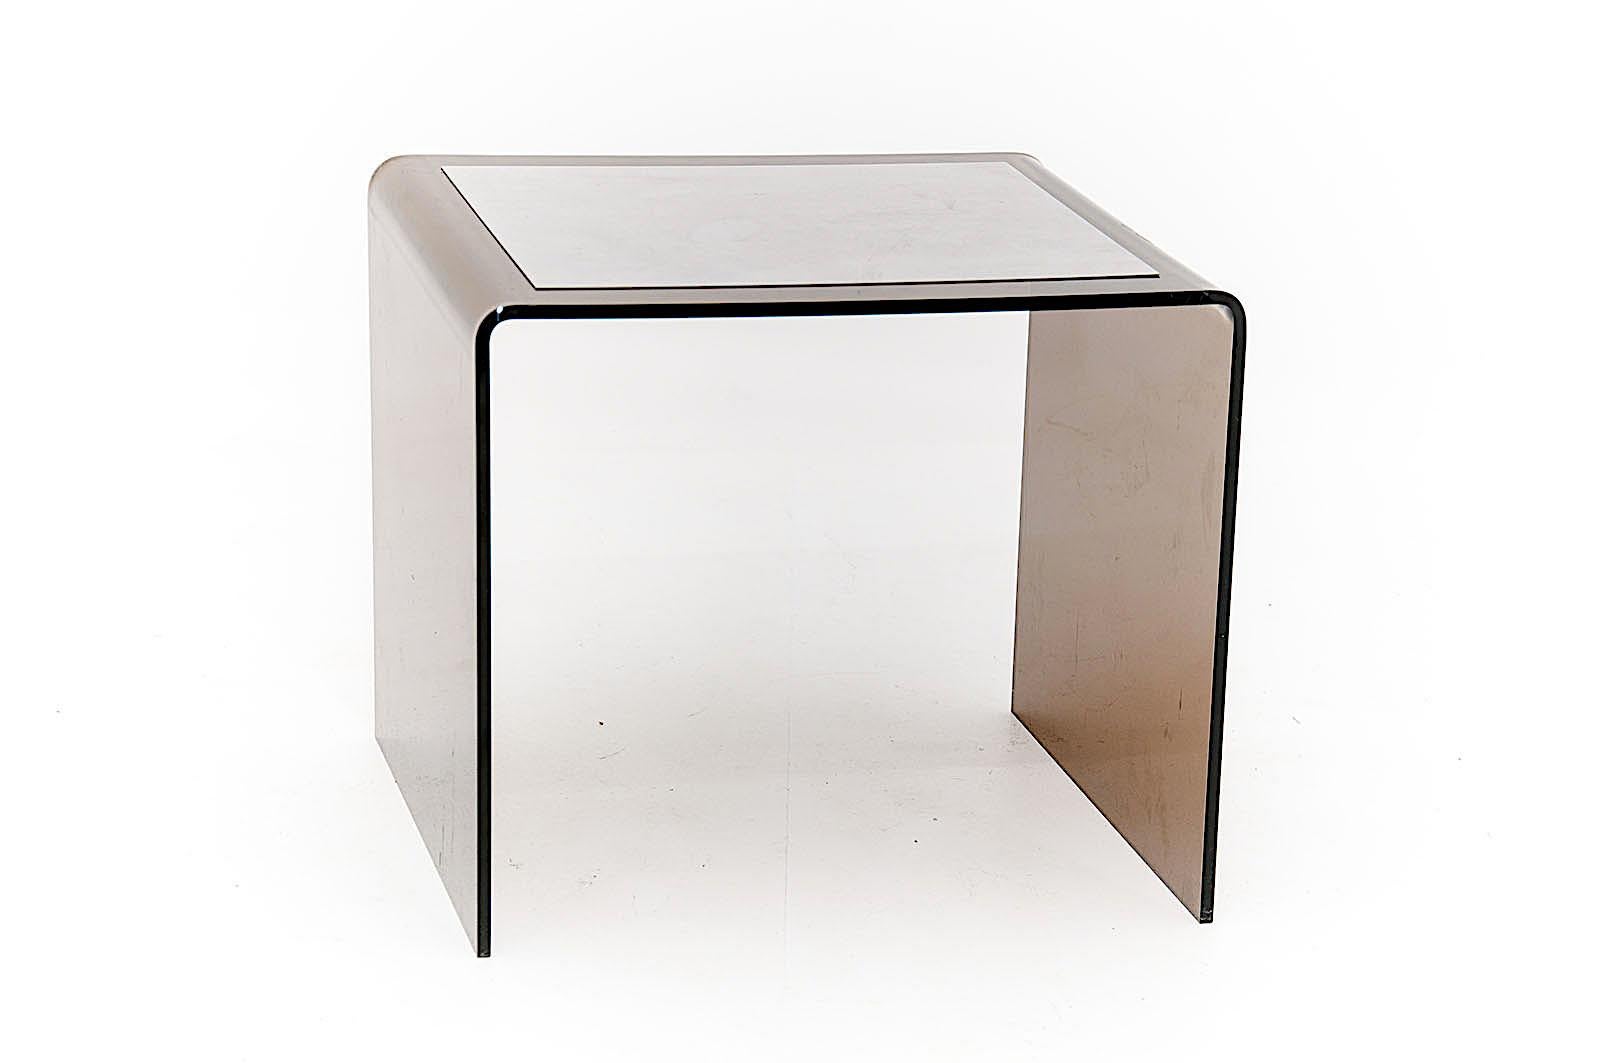 French Side Table in Smoked Lucite & Aluminium Color, Waterfall Style, 1970 from France